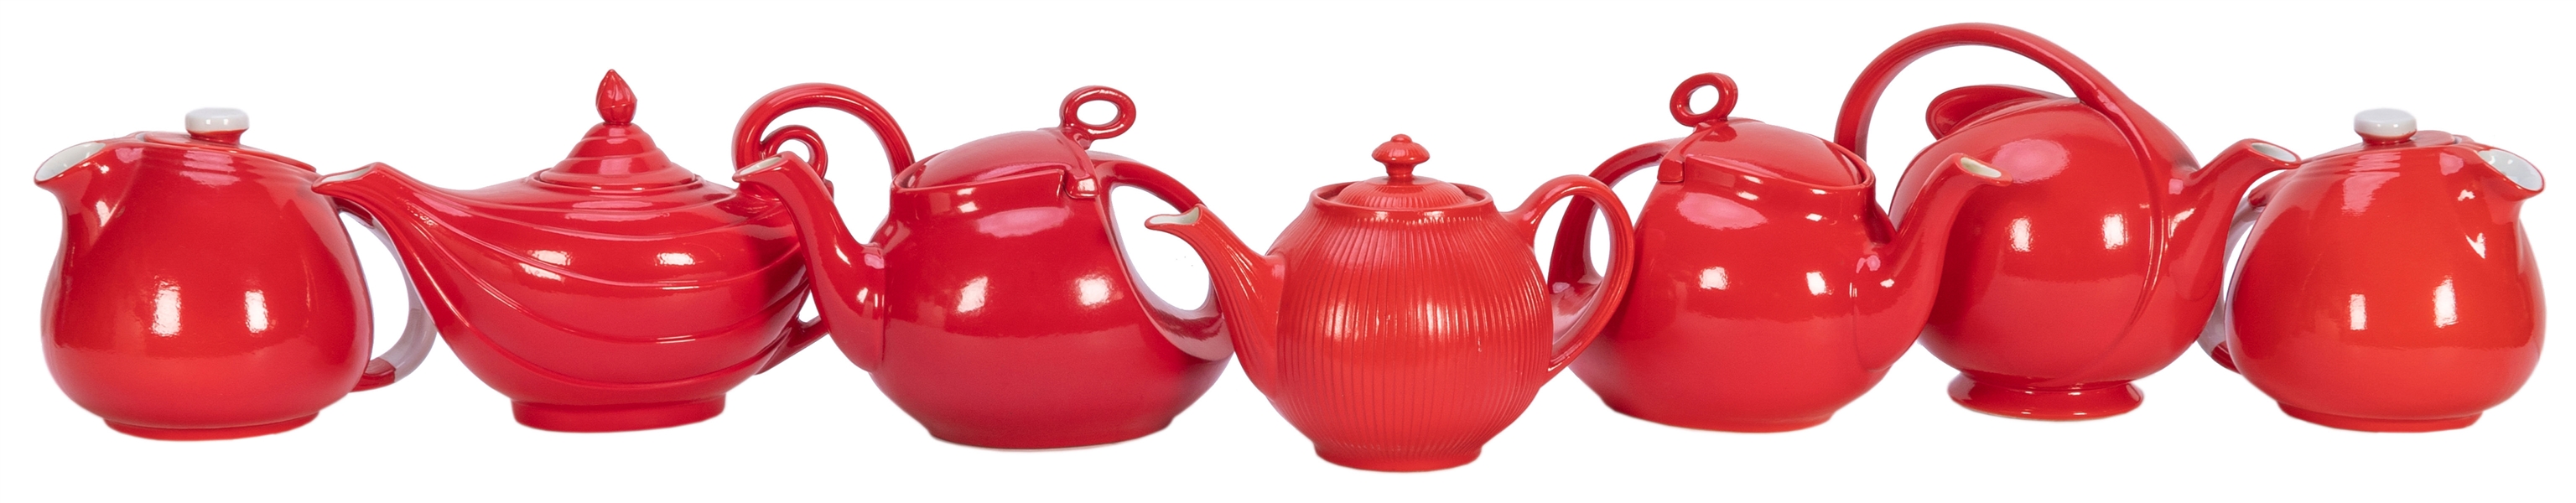  Hall China Chinese Red Teapots (7). Includes Aladdin, Airfl...